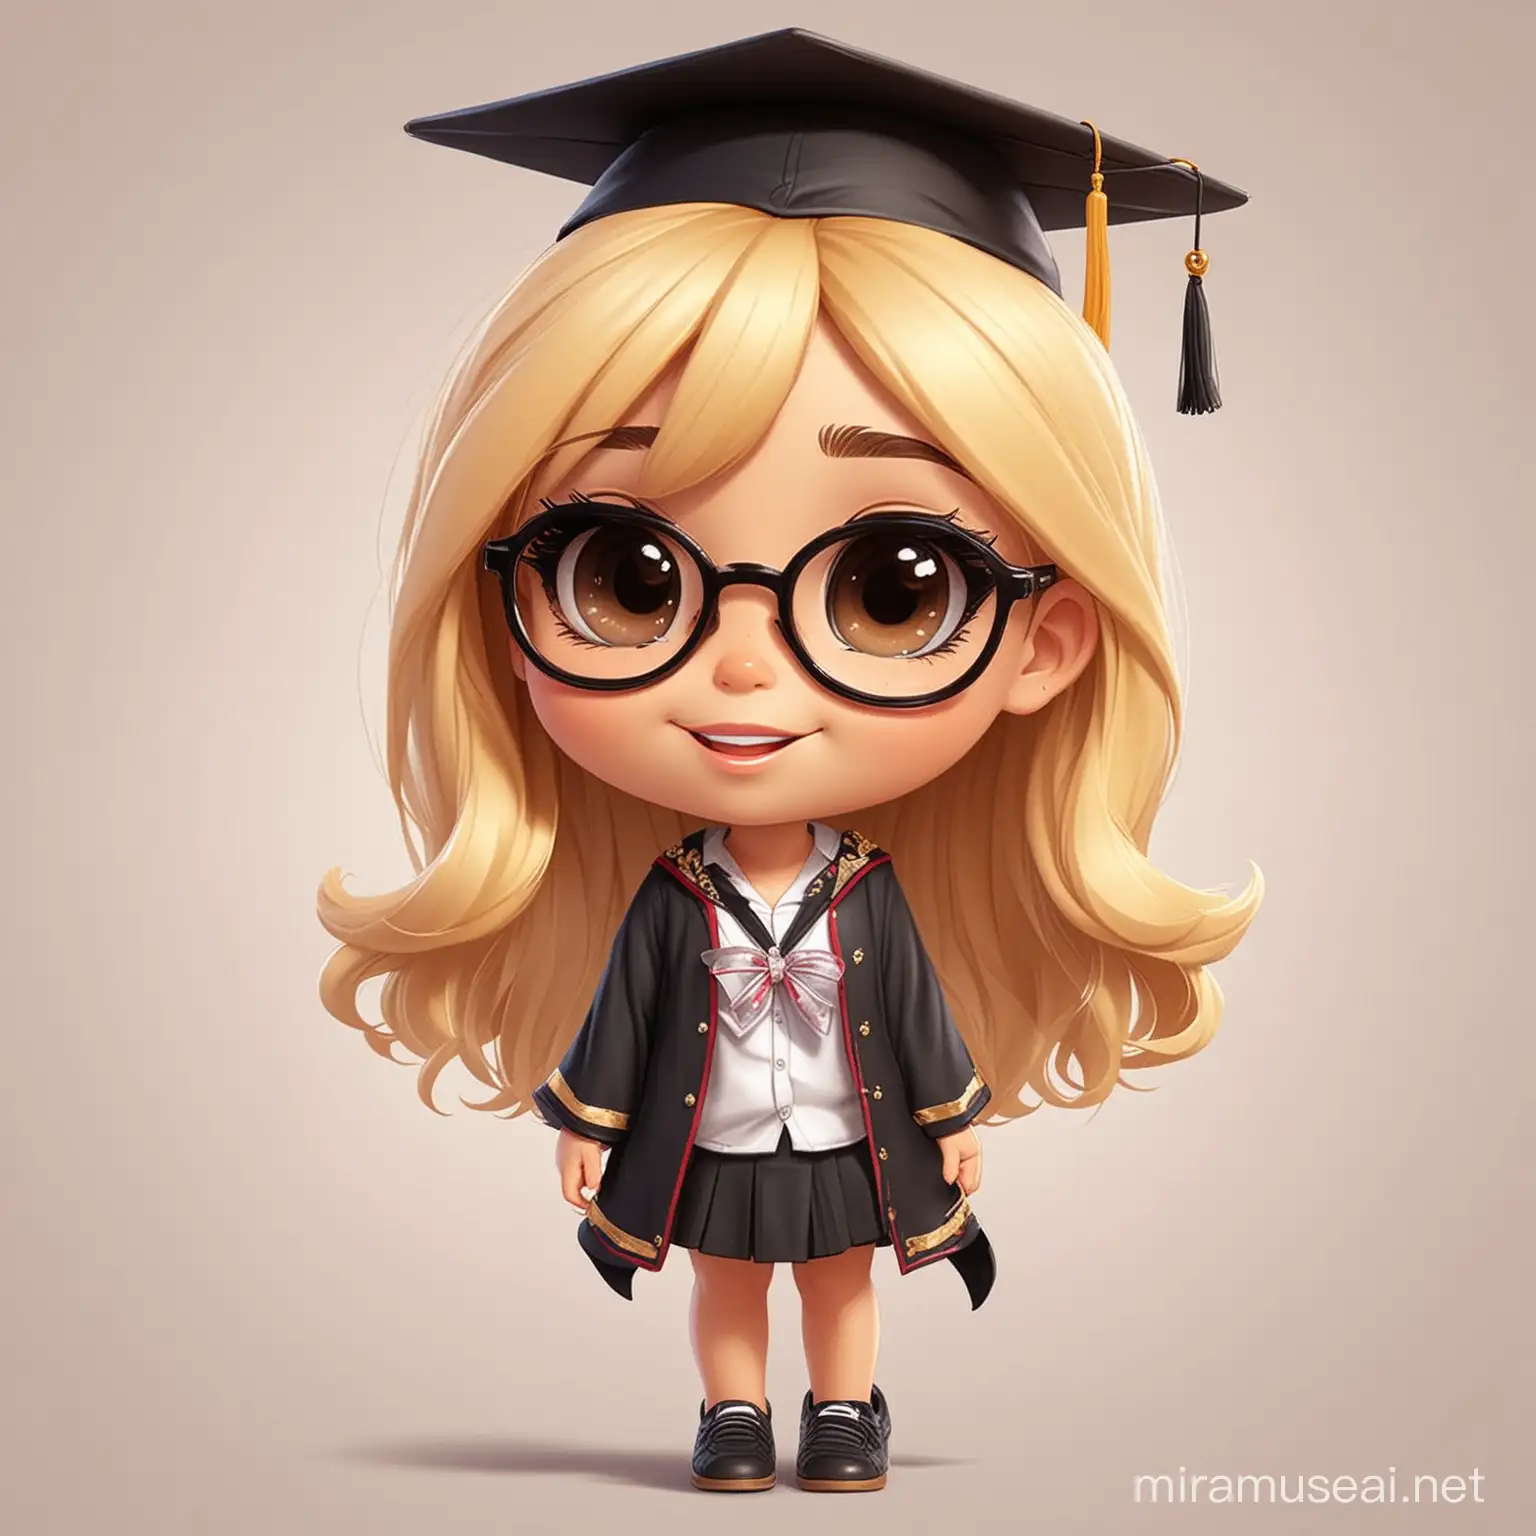 Chibi Latina Graduation Cute Disney Cartoon Style Portrait of a Girl in Glasses with Blonde Hair